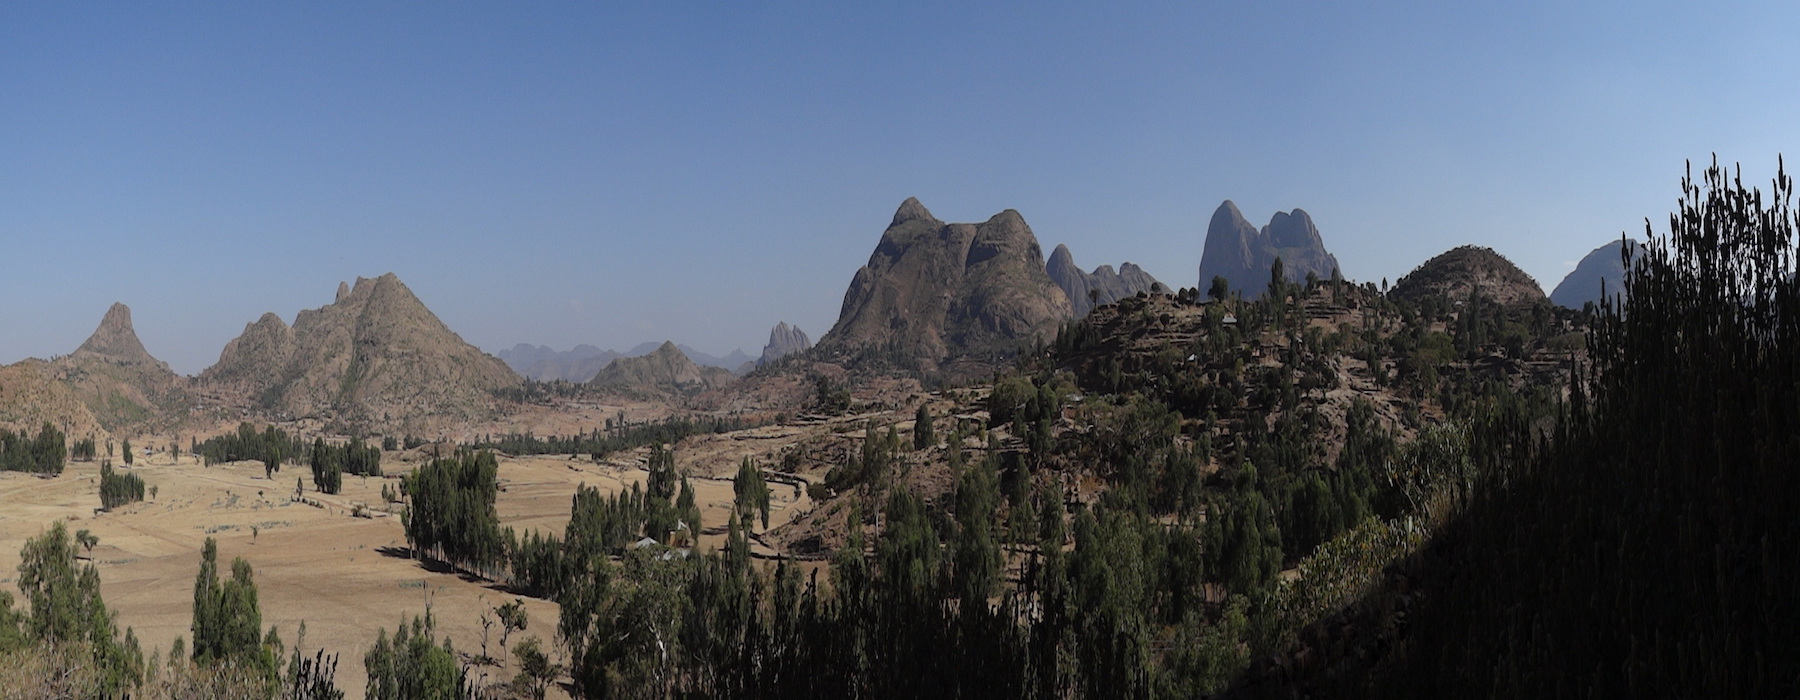 Tigray - paysages